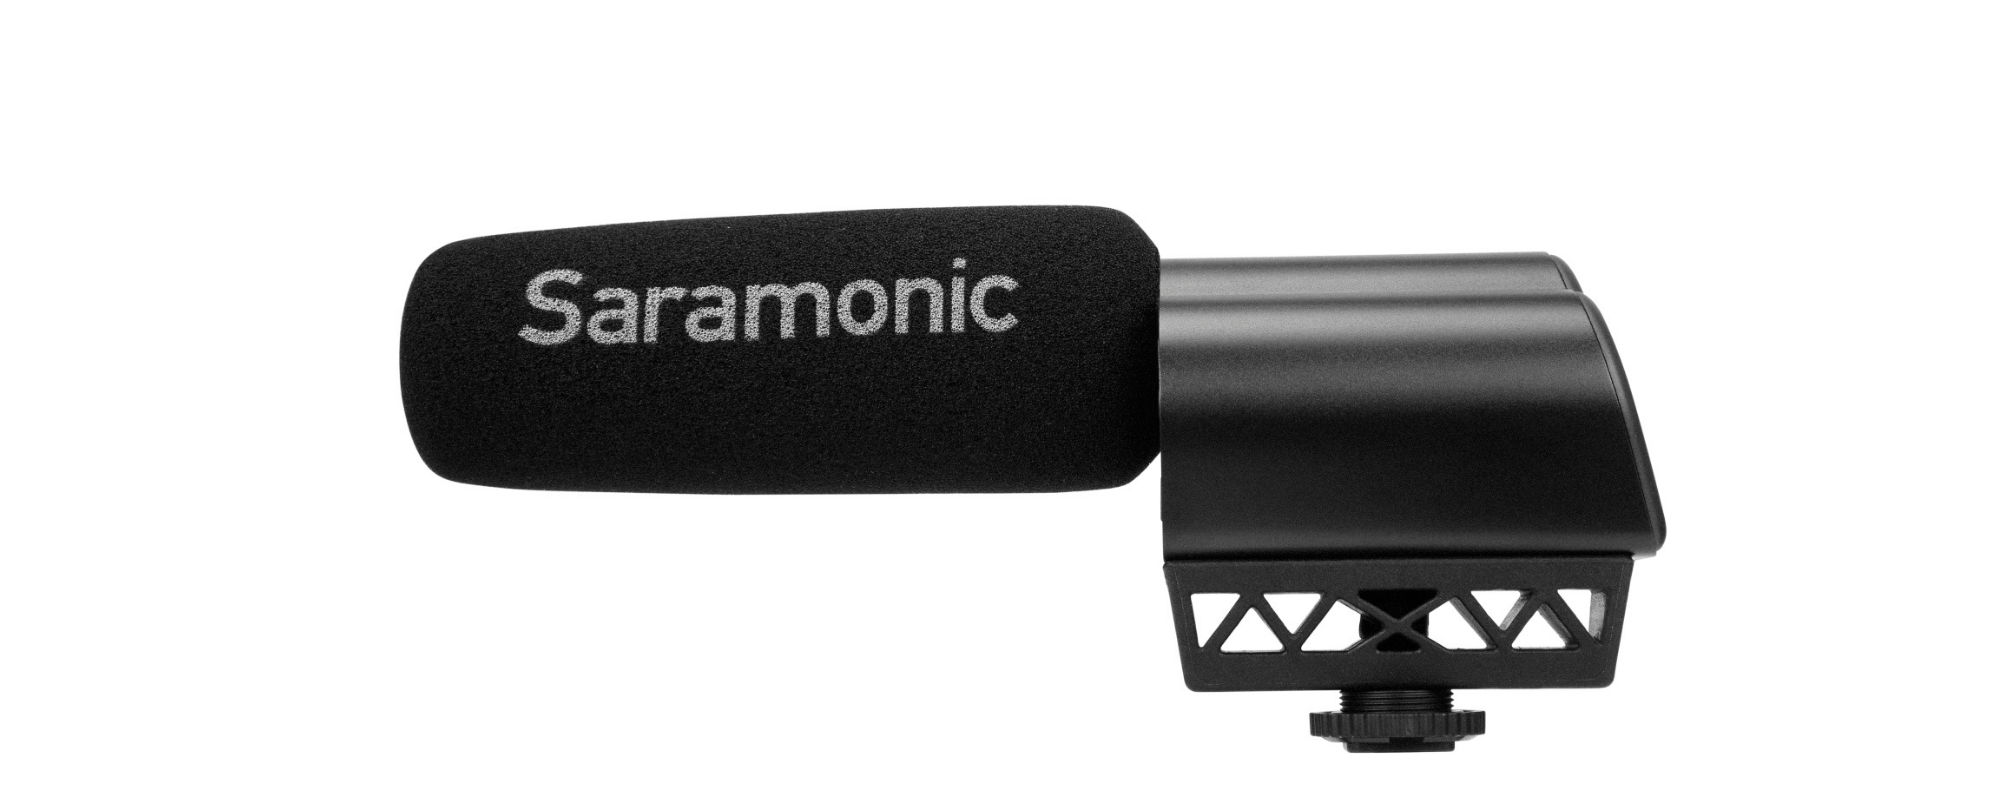 Saramonic Vmic Pro Mark II condenser microphone for cameras and camcorders